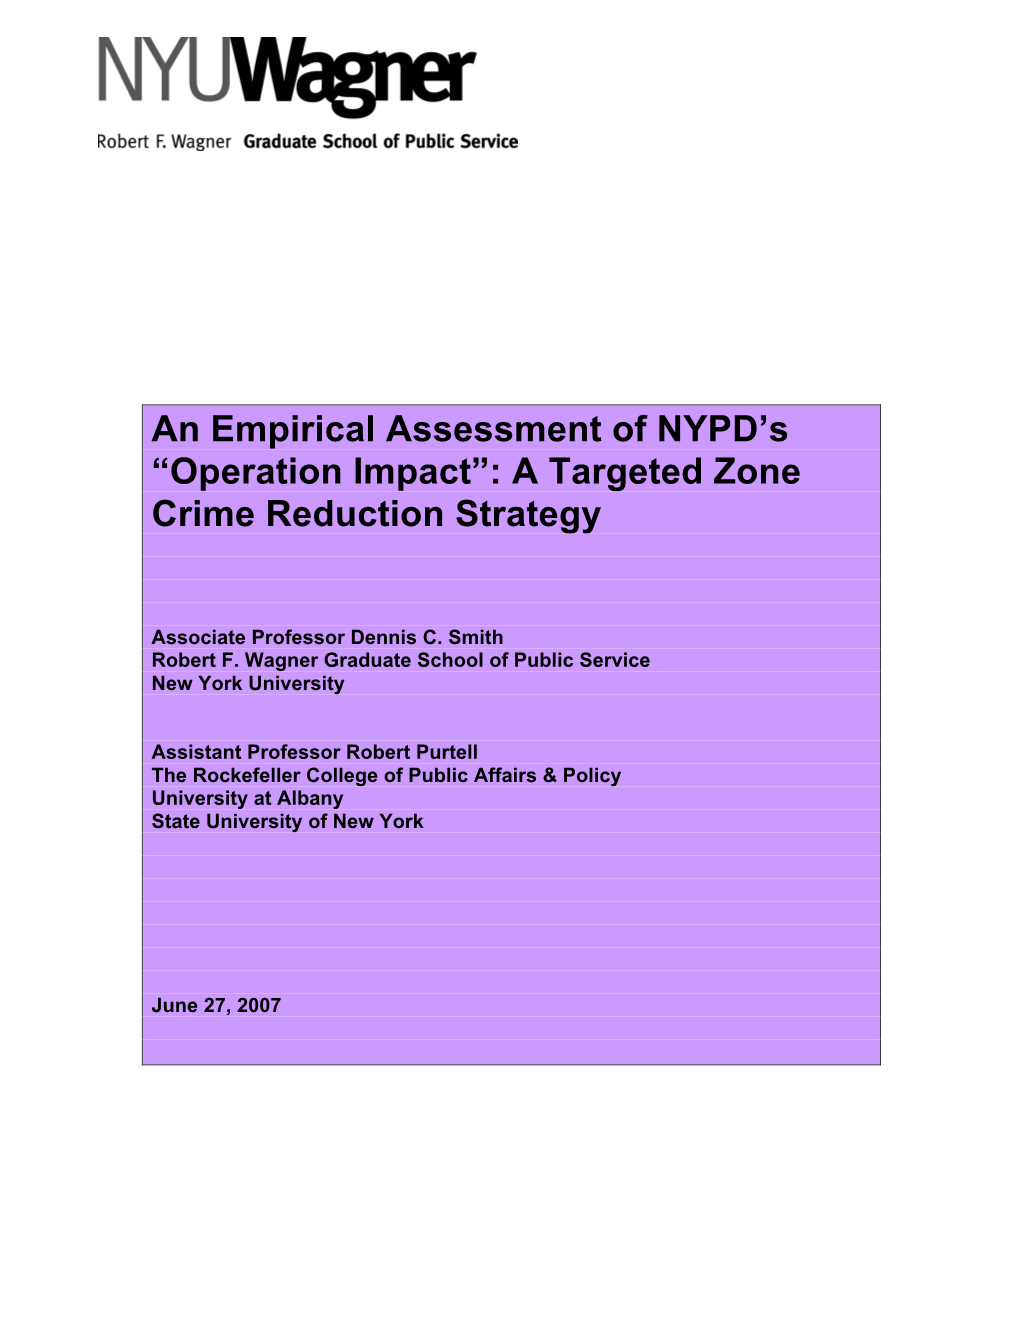 Operation Impact”: a Targeted Zone Crime Reduction Strategy